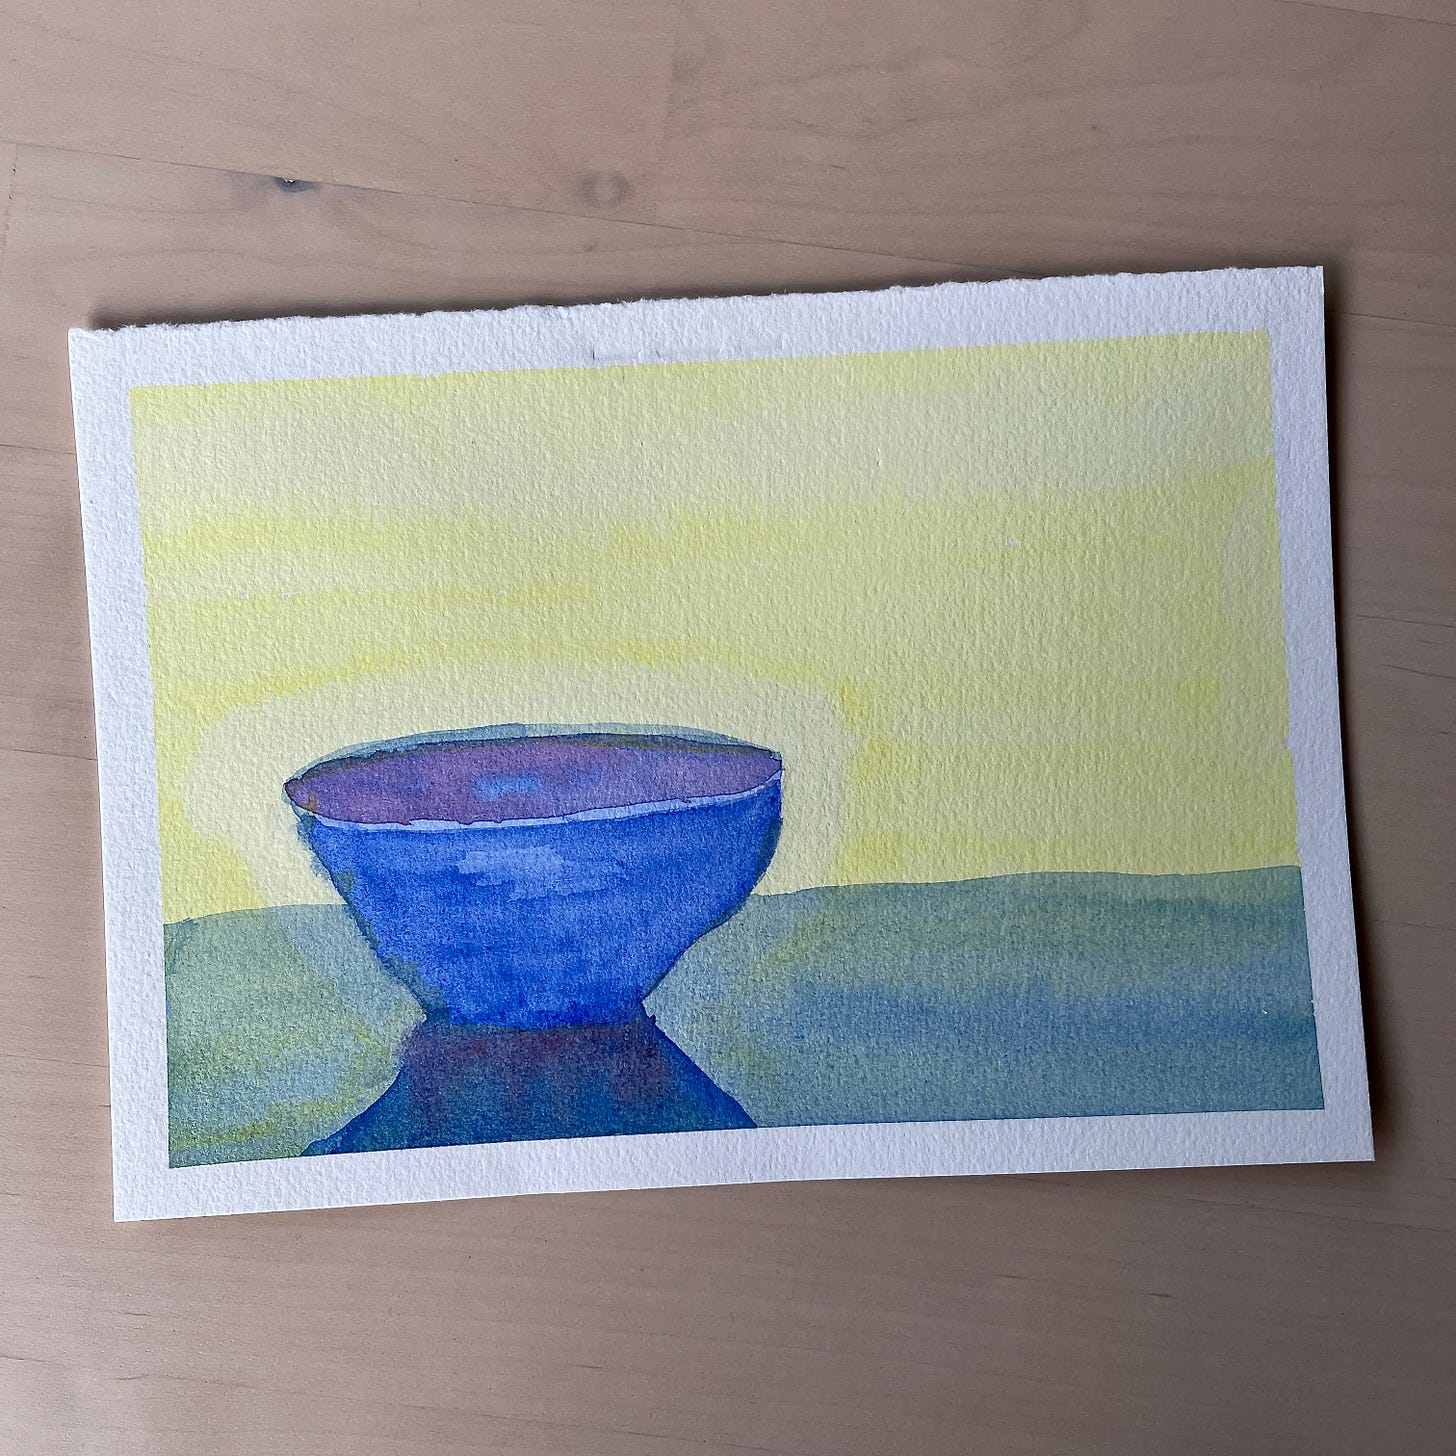 Image: a photo of my basic watercolour wash painting practice. A background of lemony yellow, with a china blue bowl on a bluish, greenish table.